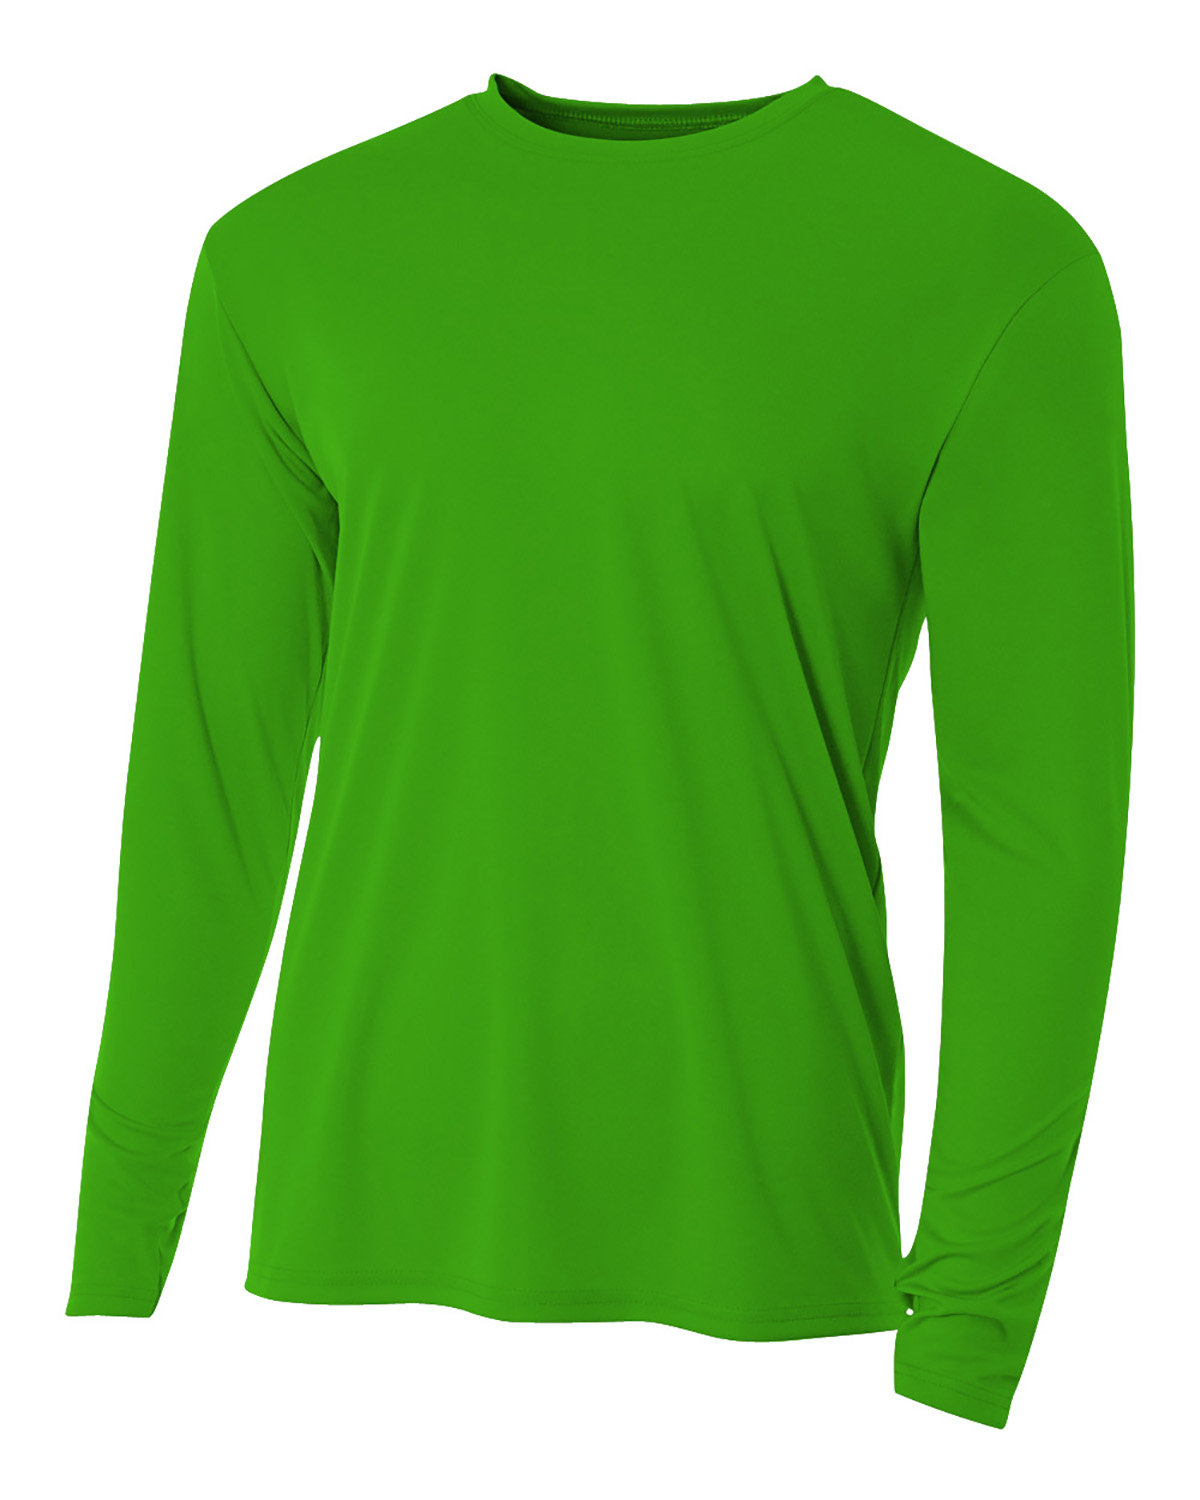 A4 Youth Long Sleeve Cooling Performance Crew Shirt KELLY 